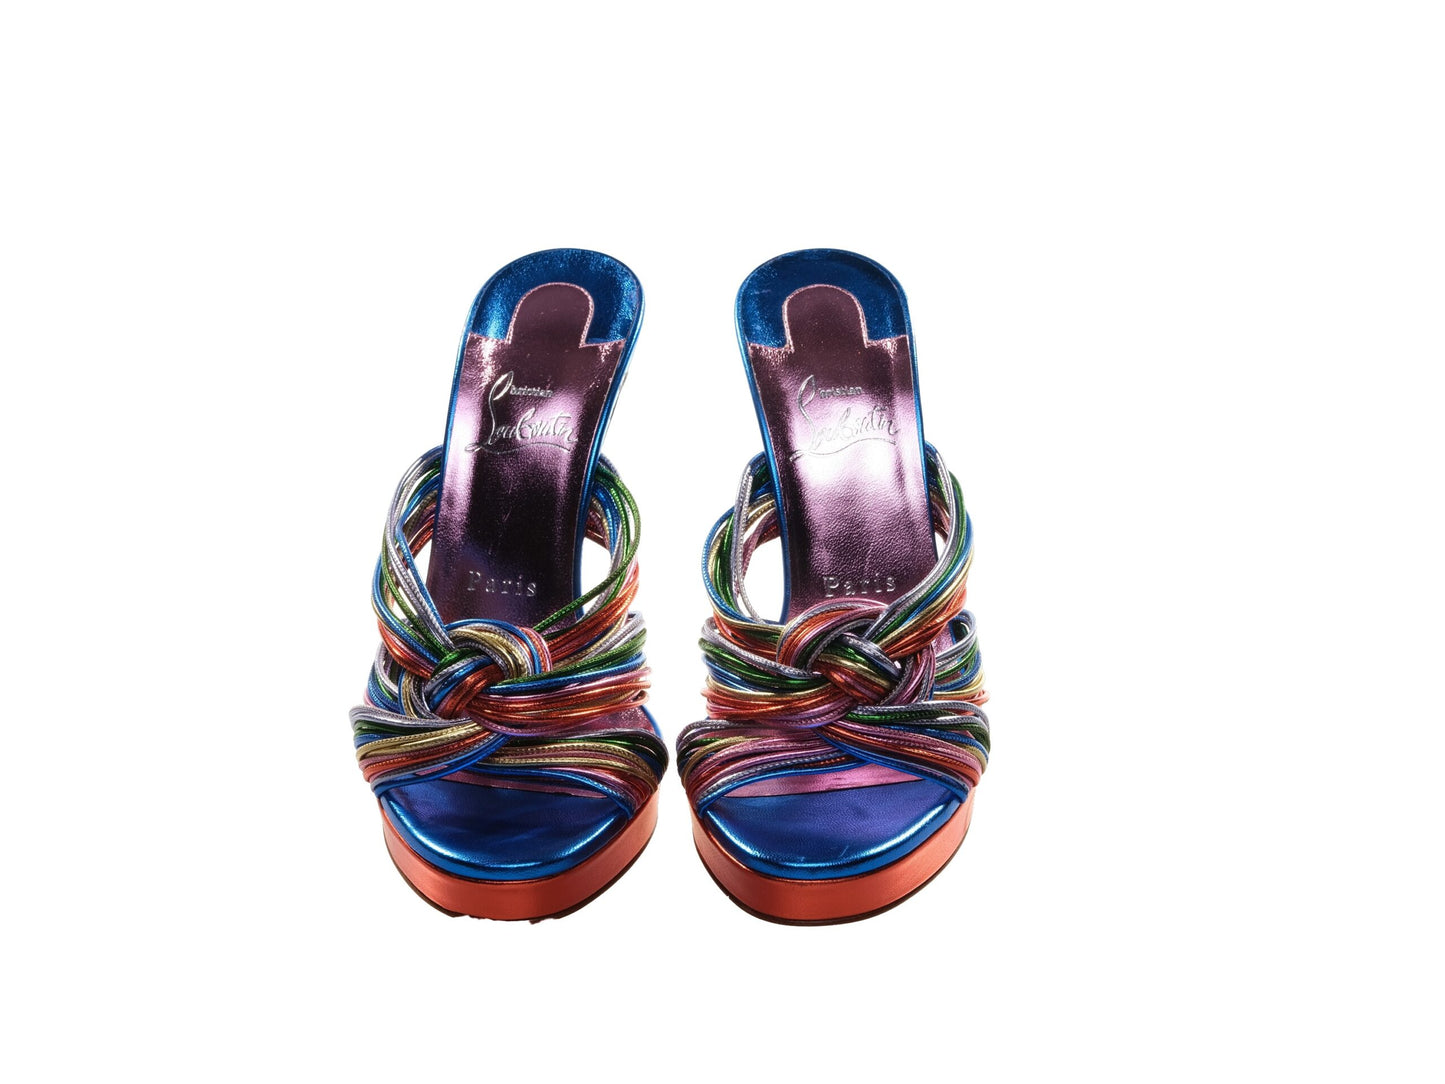 Christian Louboutin Multitaski Alta 120 Multicoloured Leather Knotted Strappy High Heel Mules